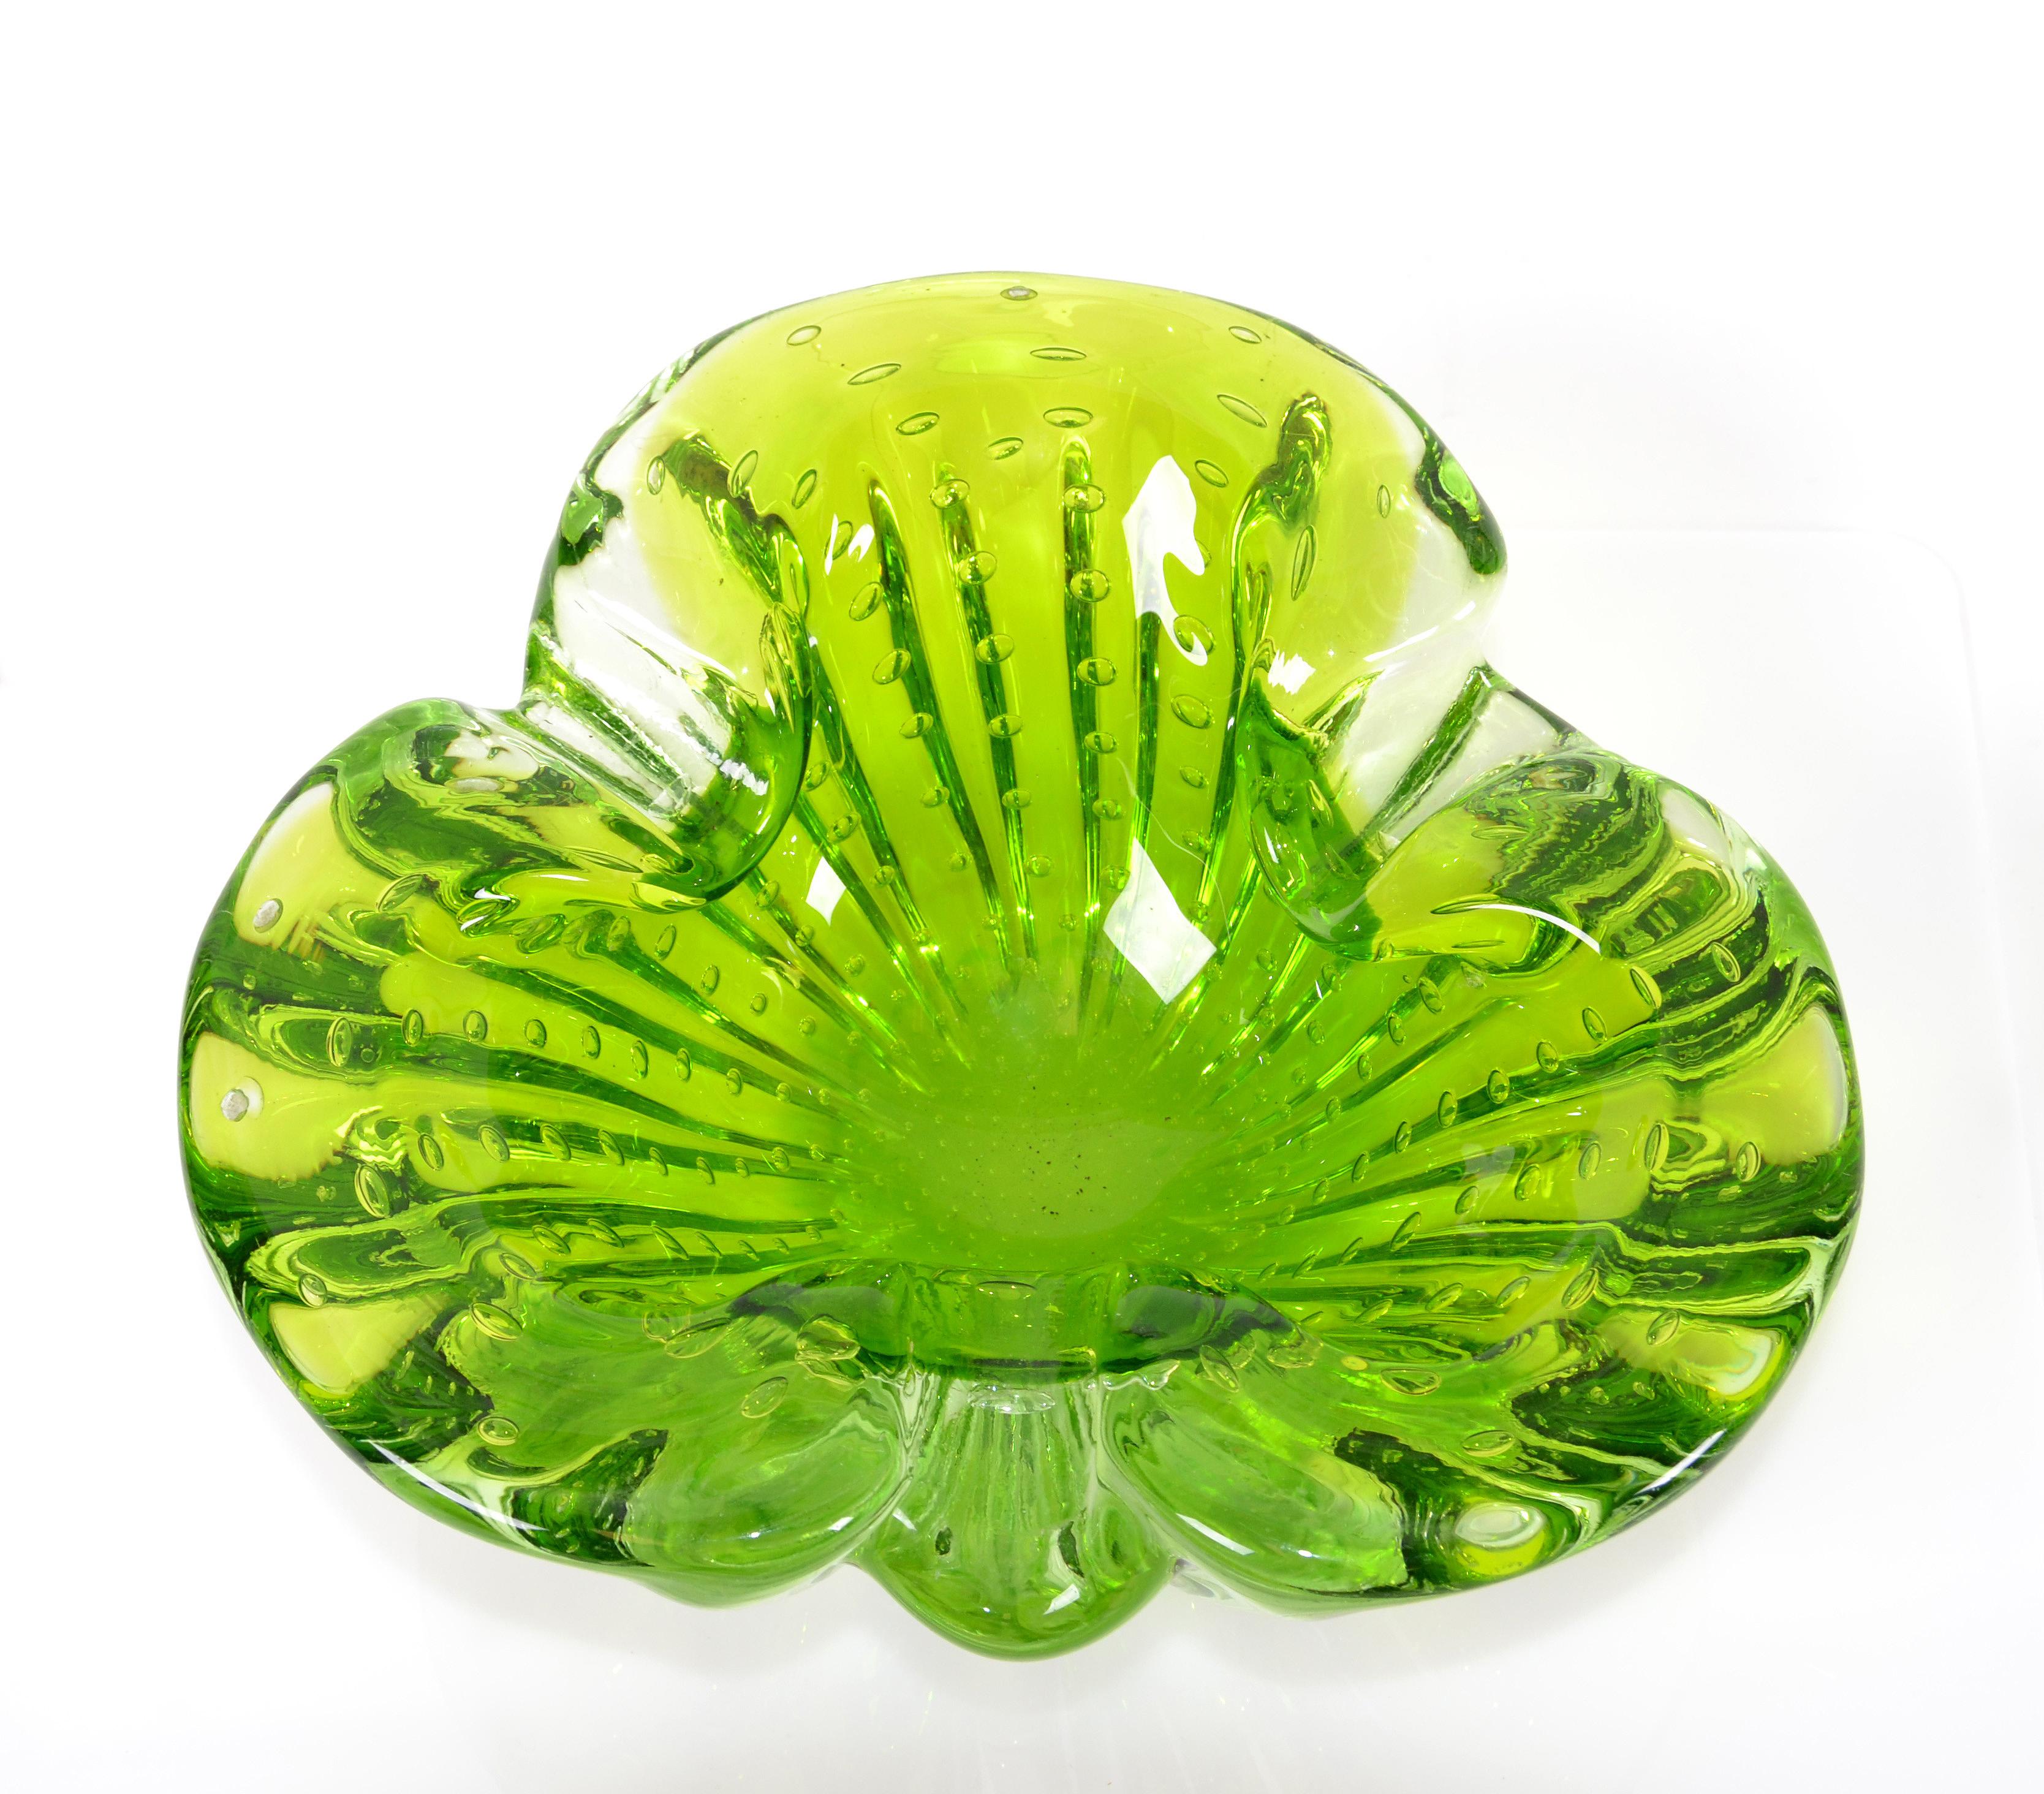 Hand-Crafted Italian Blown Murano Glass Neon Green Controlled Bubble Catchall, Bowl, Ashtray